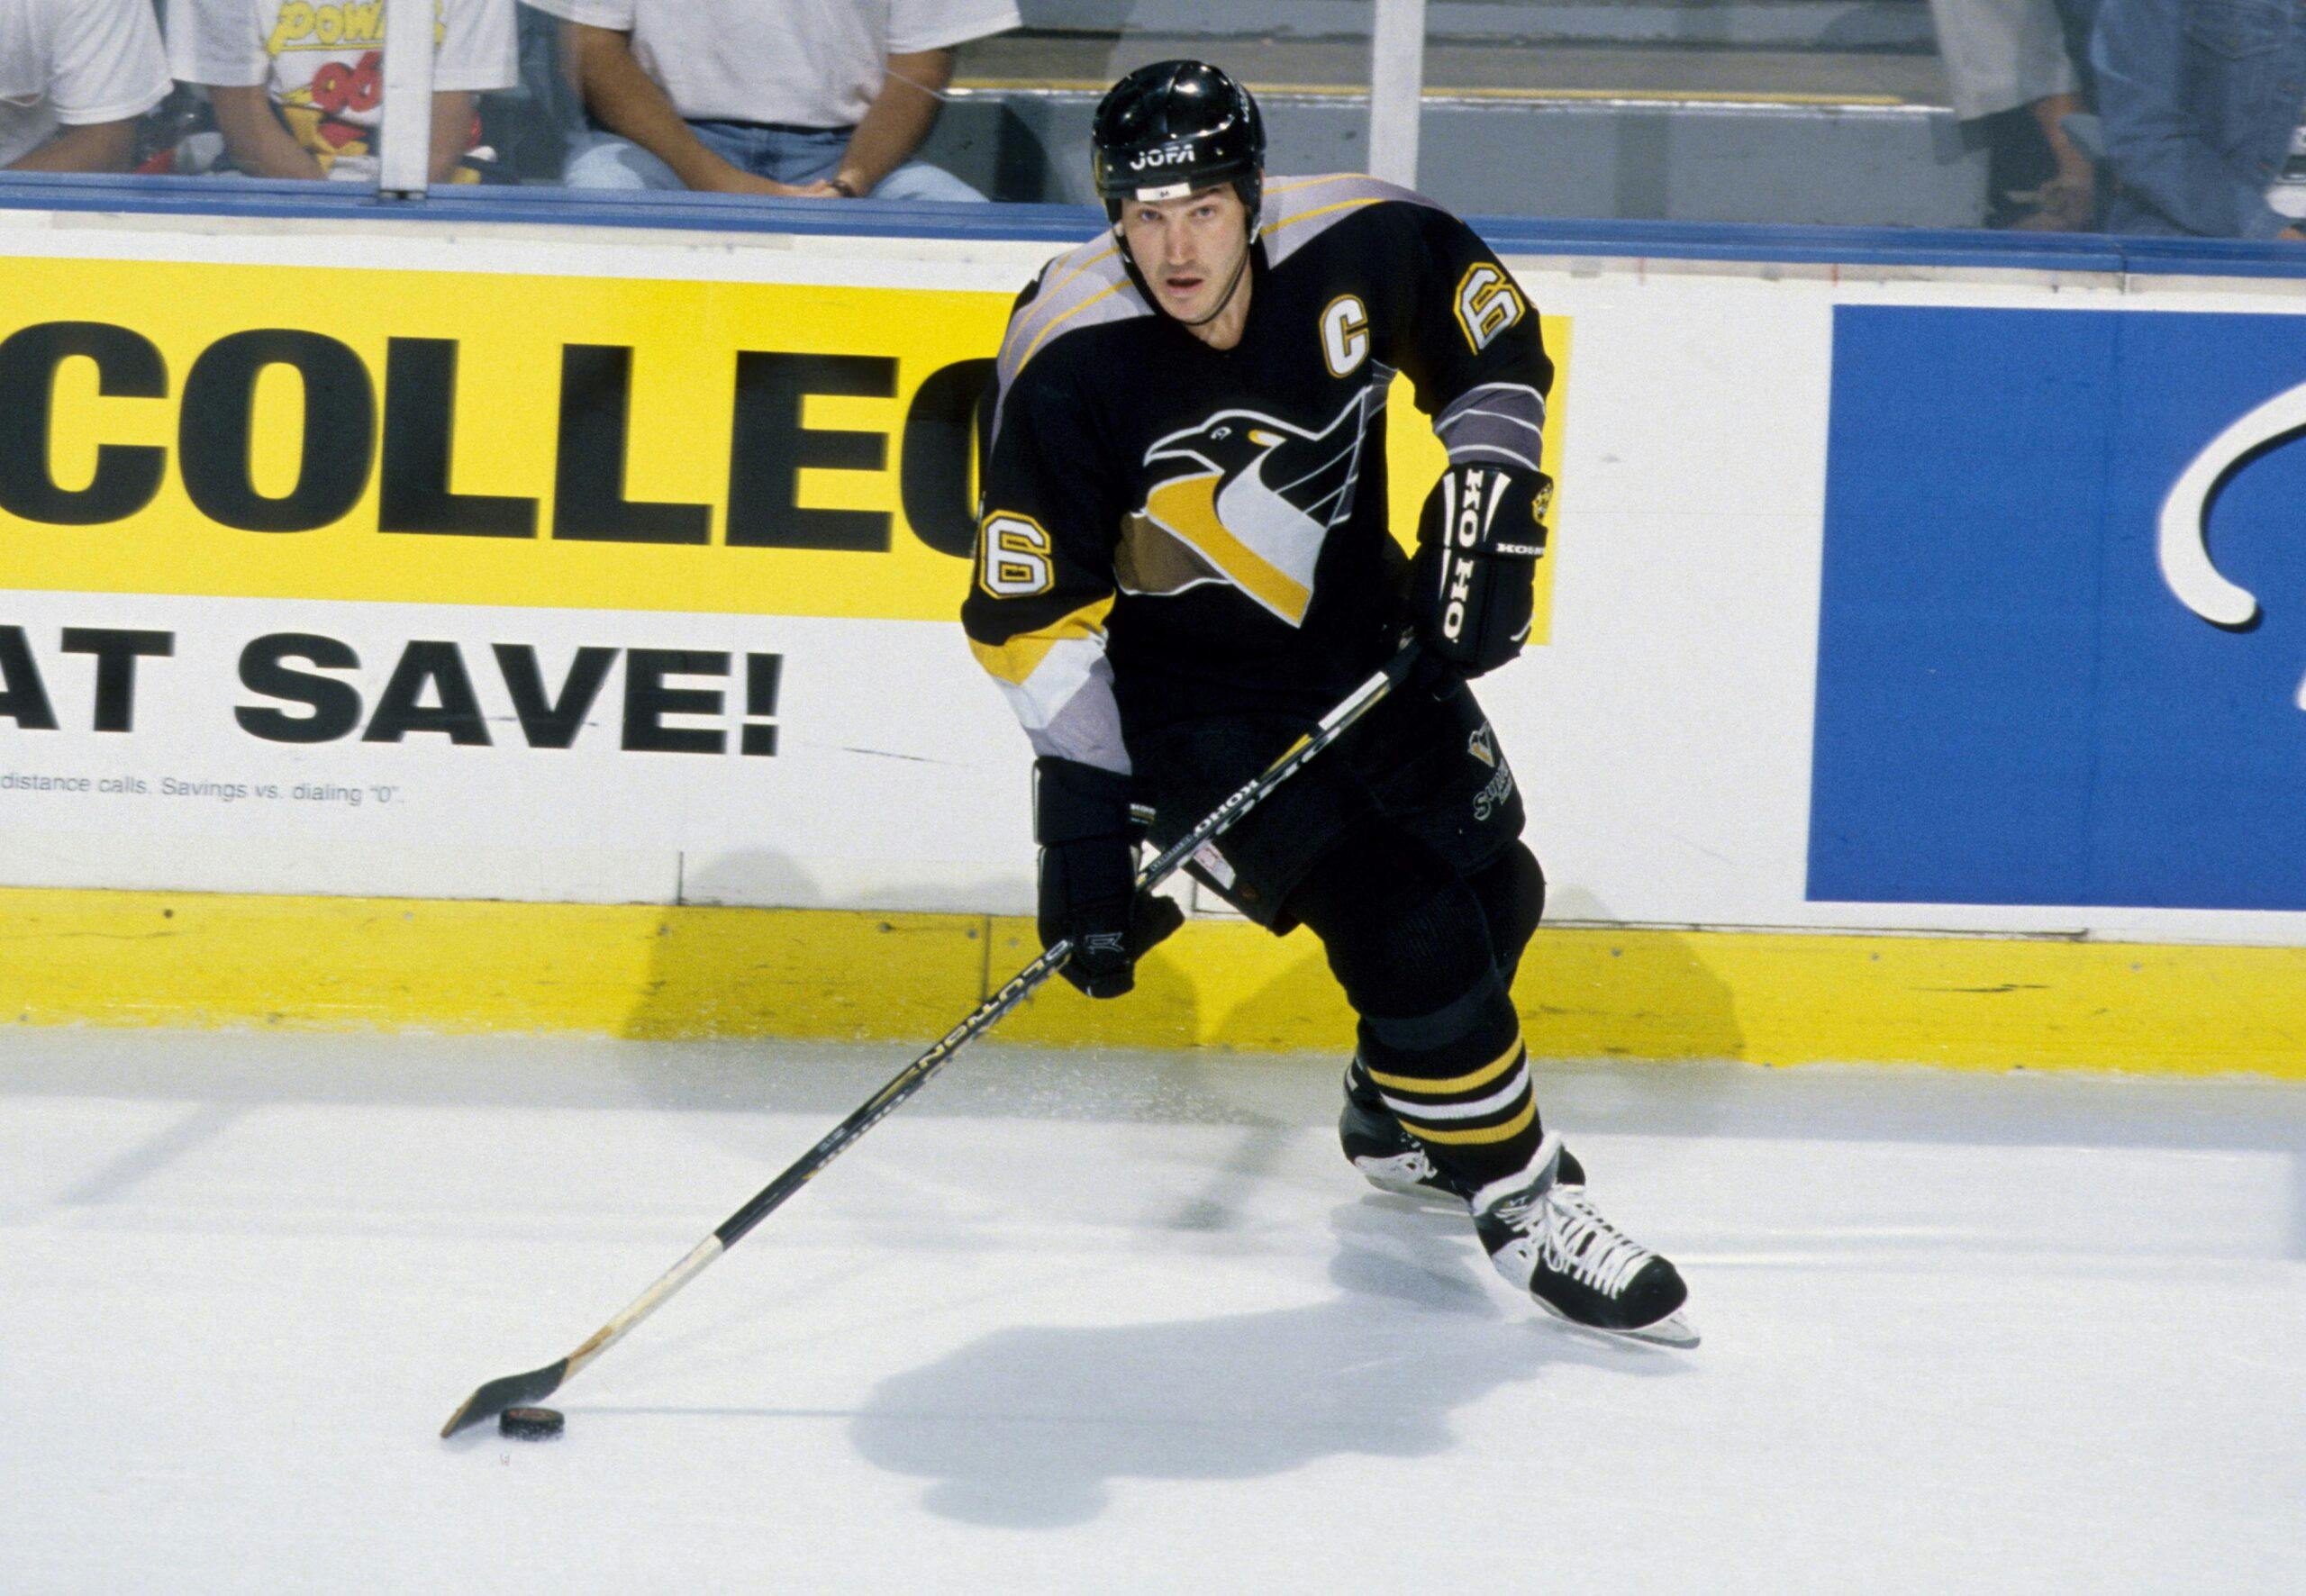 Looking back at one of the craziest games of Mario Lemieux’s career